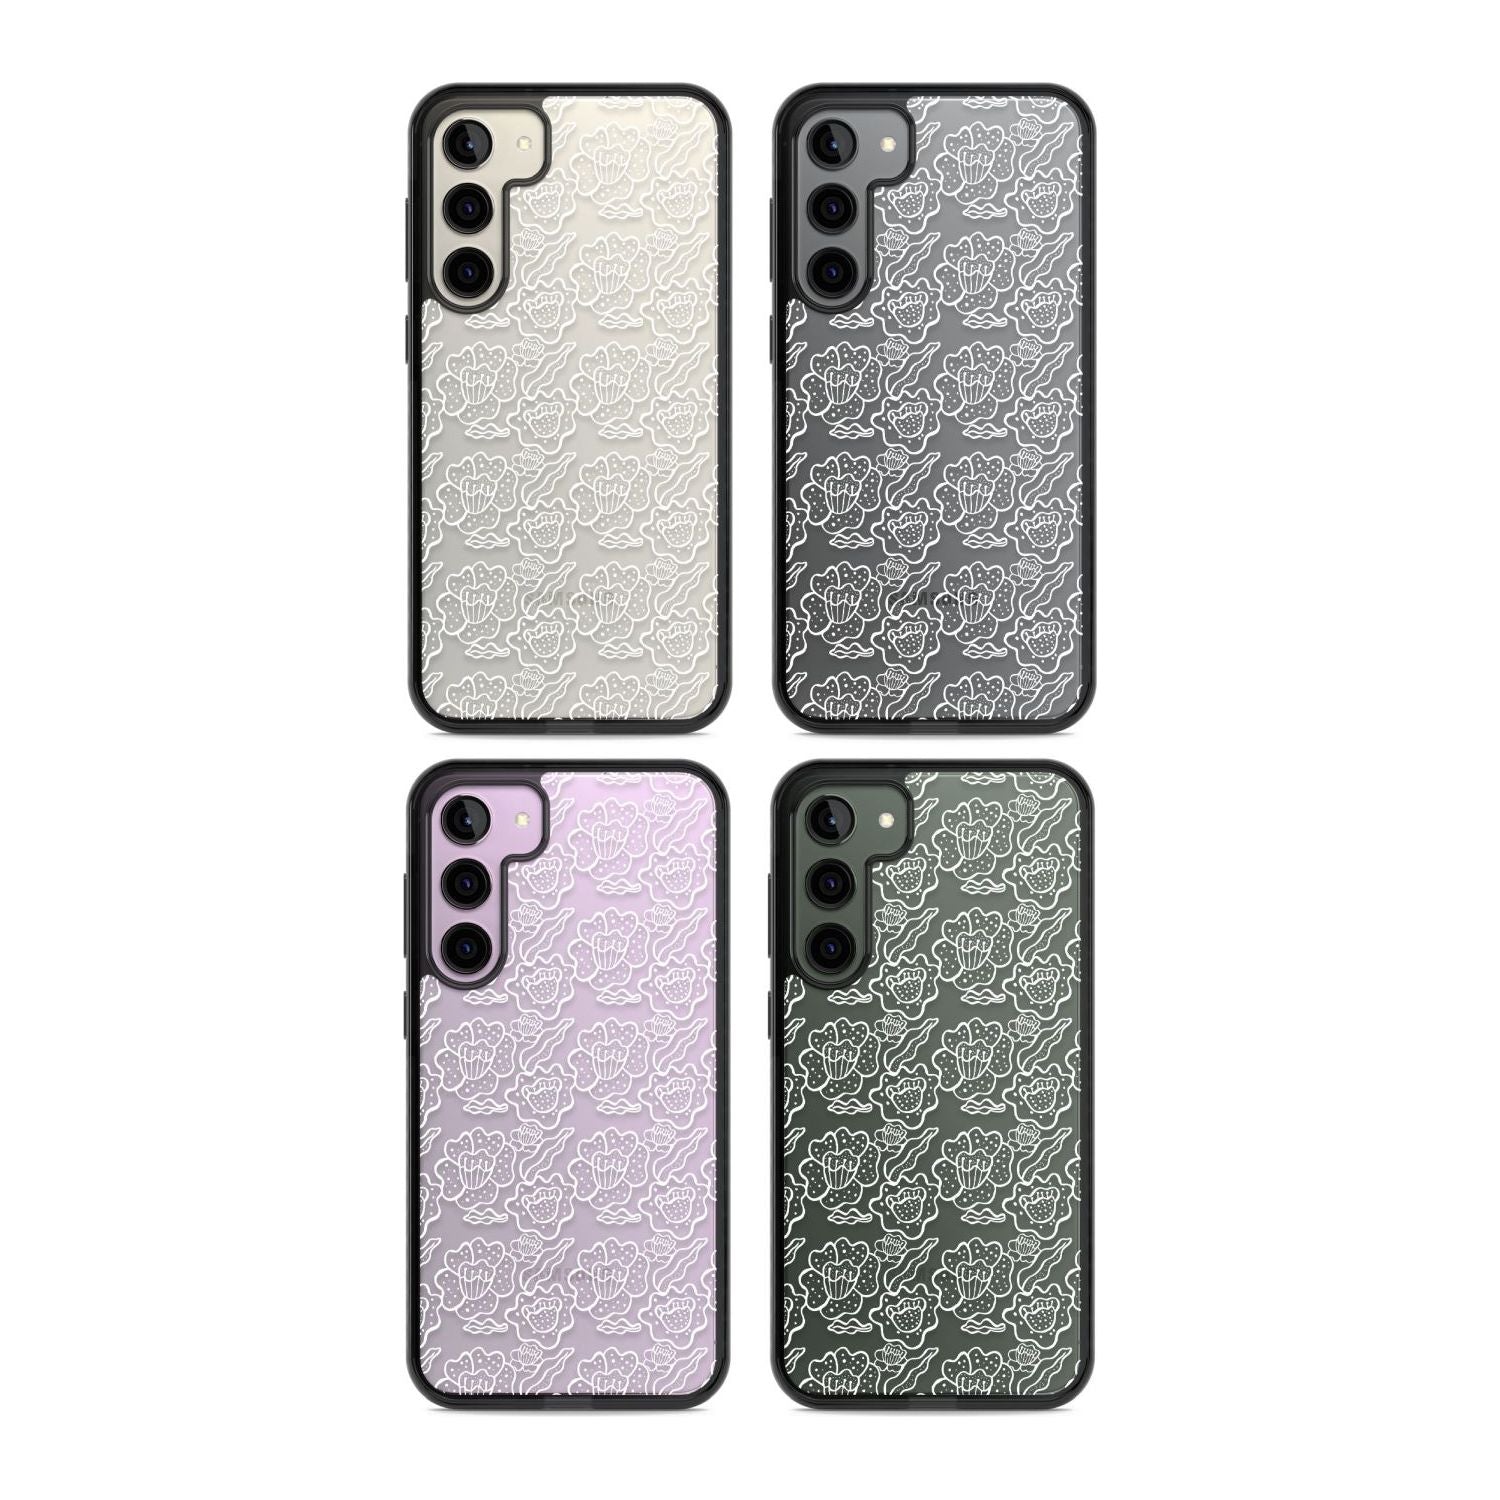 Funky Floral Patterns White on Clear Phone Case iPhone 15 Pro Max / Black Impact Case,iPhone 15 Plus / Black Impact Case,iPhone 15 Pro / Black Impact Case,iPhone 15 / Black Impact Case,iPhone 15 Pro Max / Impact Case,iPhone 15 Plus / Impact Case,iPhone 15 Pro / Impact Case,iPhone 15 / Impact Case,iPhone 15 Pro Max / Magsafe Black Impact Case,iPhone 15 Plus / Magsafe Black Impact Case,iPhone 15 Pro / Magsafe Black Impact Case,iPhone 15 / Magsafe Black Impact Case,iPhone 14 Pro Max / Black Impact Case,iPhone 